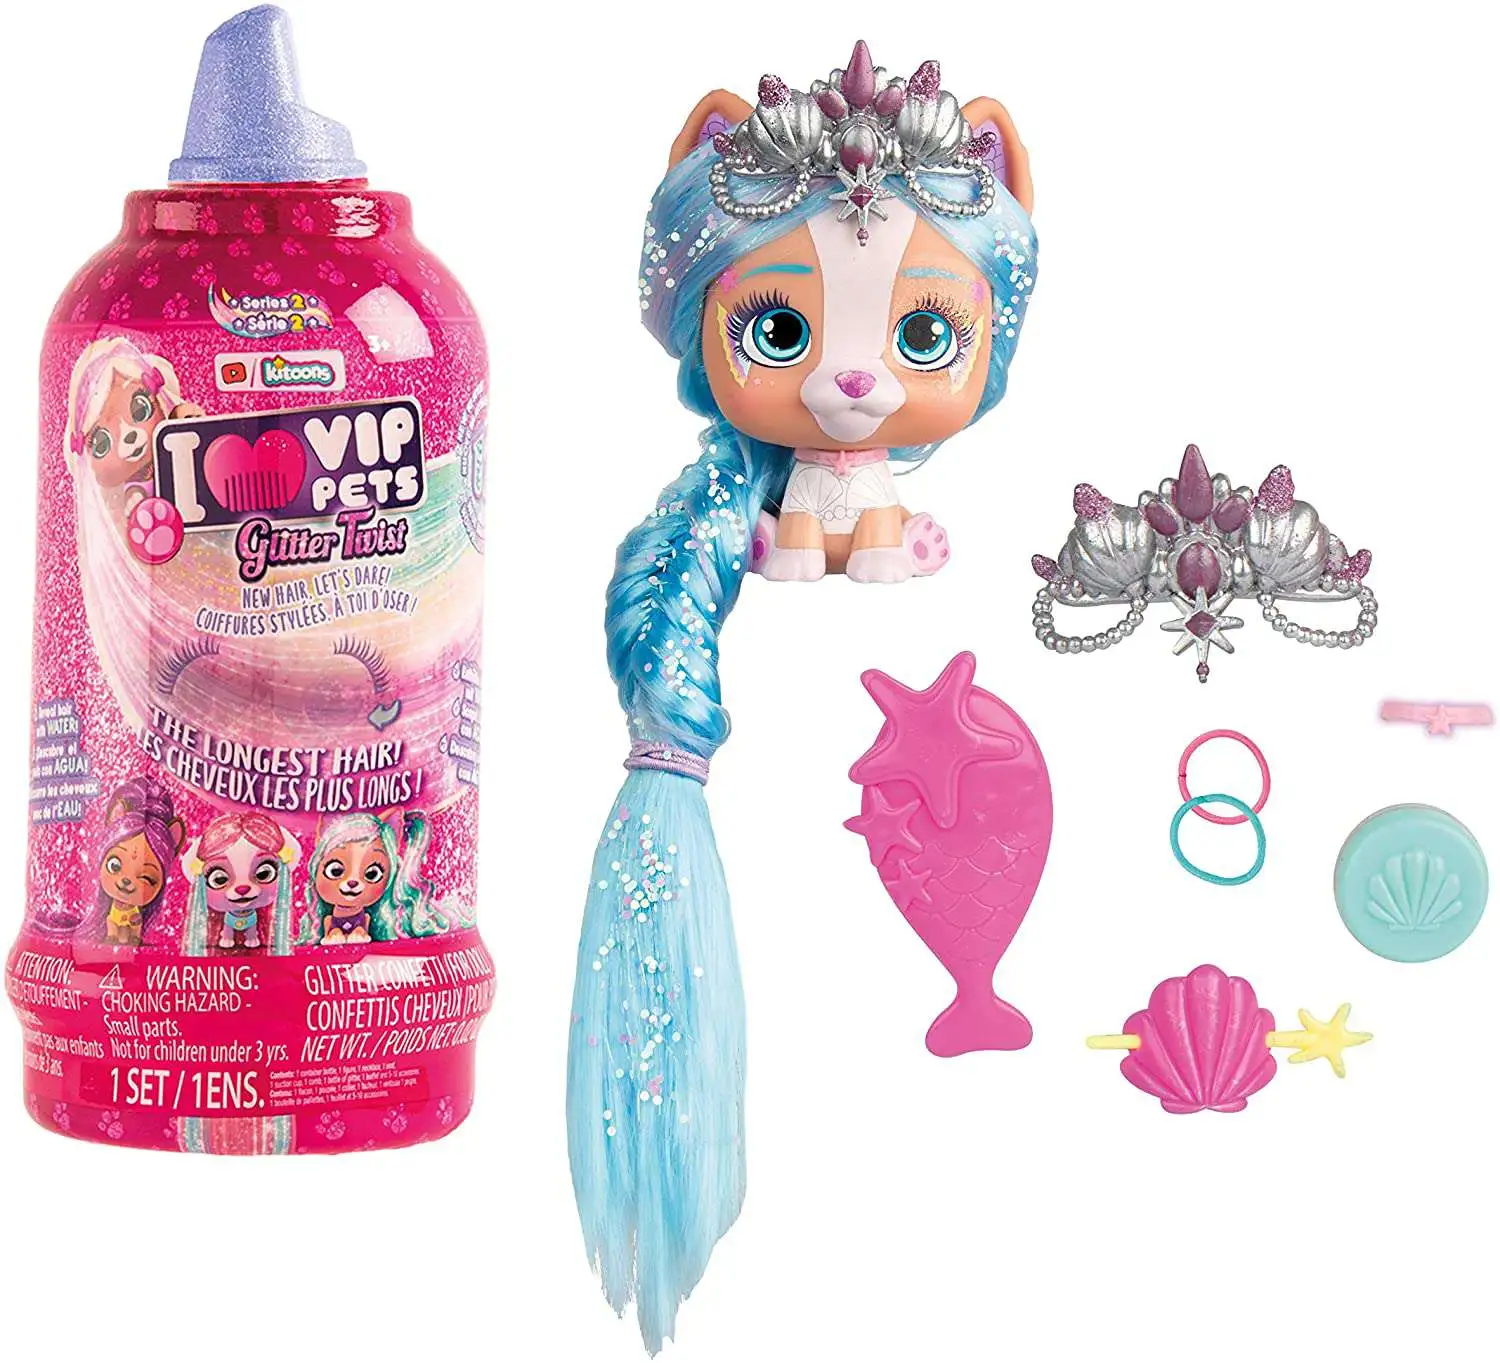 VIP Pets Series 1 Mousse Bottle Mystery Surprise Hair Reveal Doll 